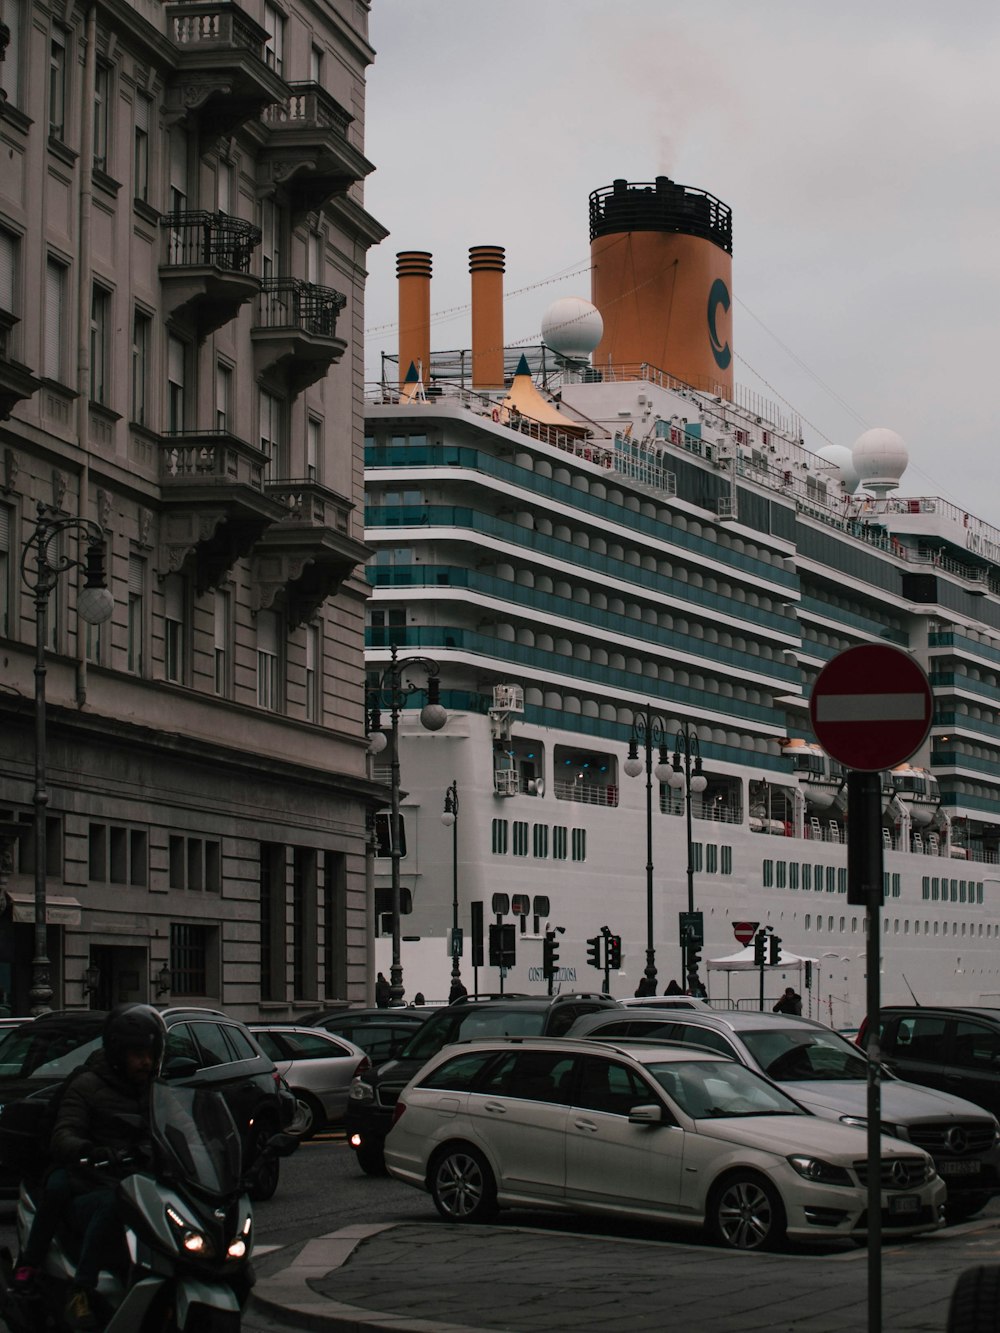 a cruise ship in the background with cars parked in front of it